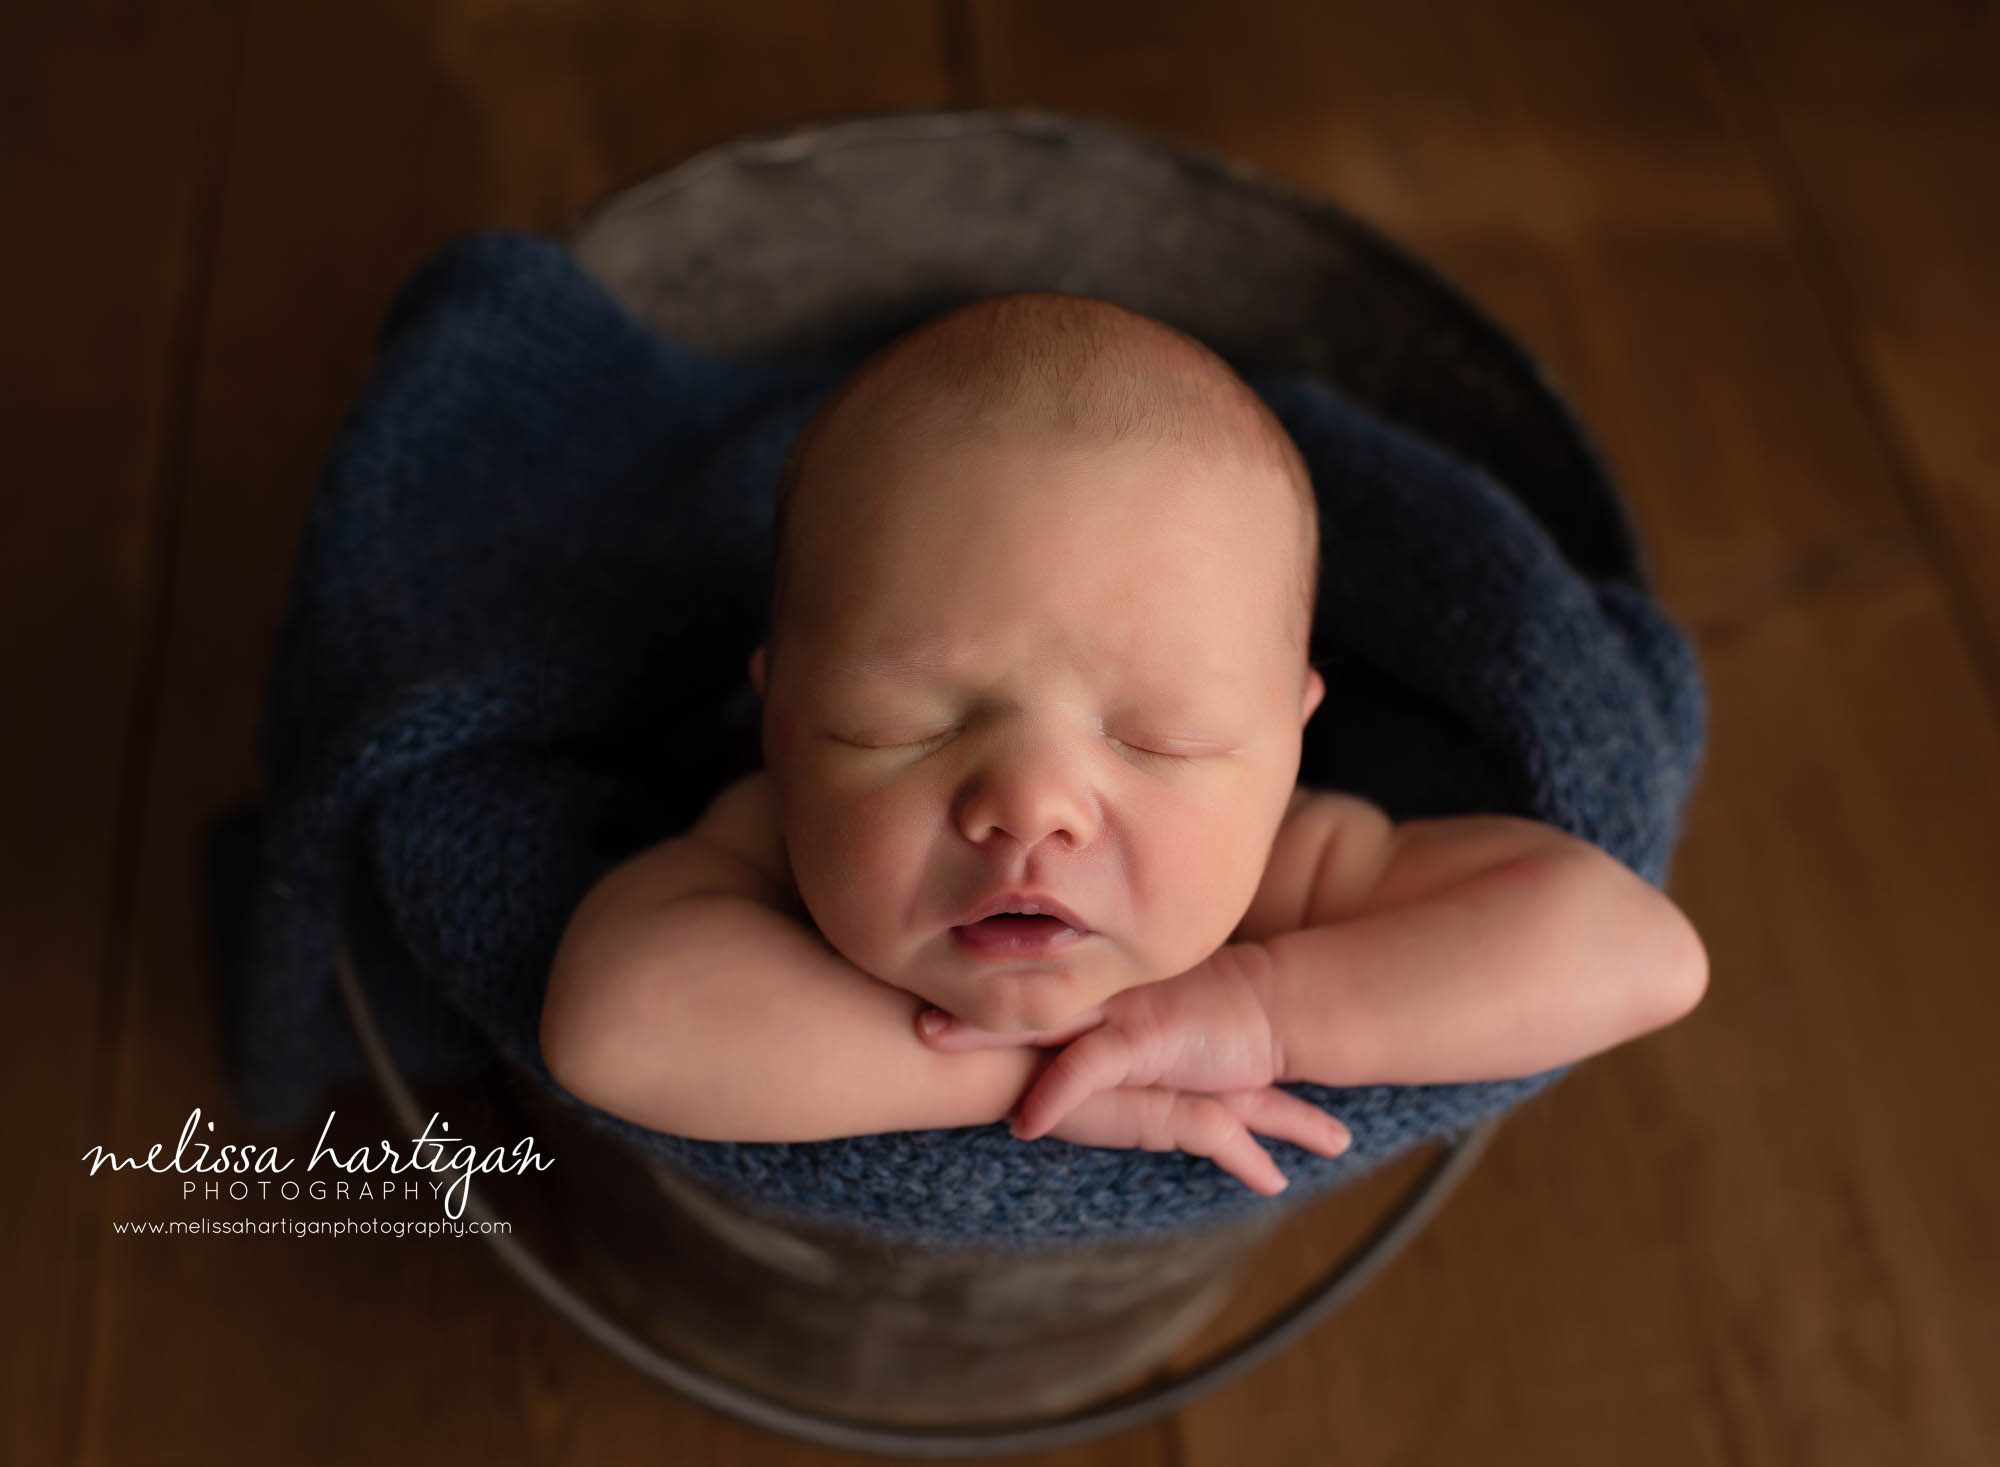 posed newborn photography baby posed in metal bucket with navy blue knitted wrap